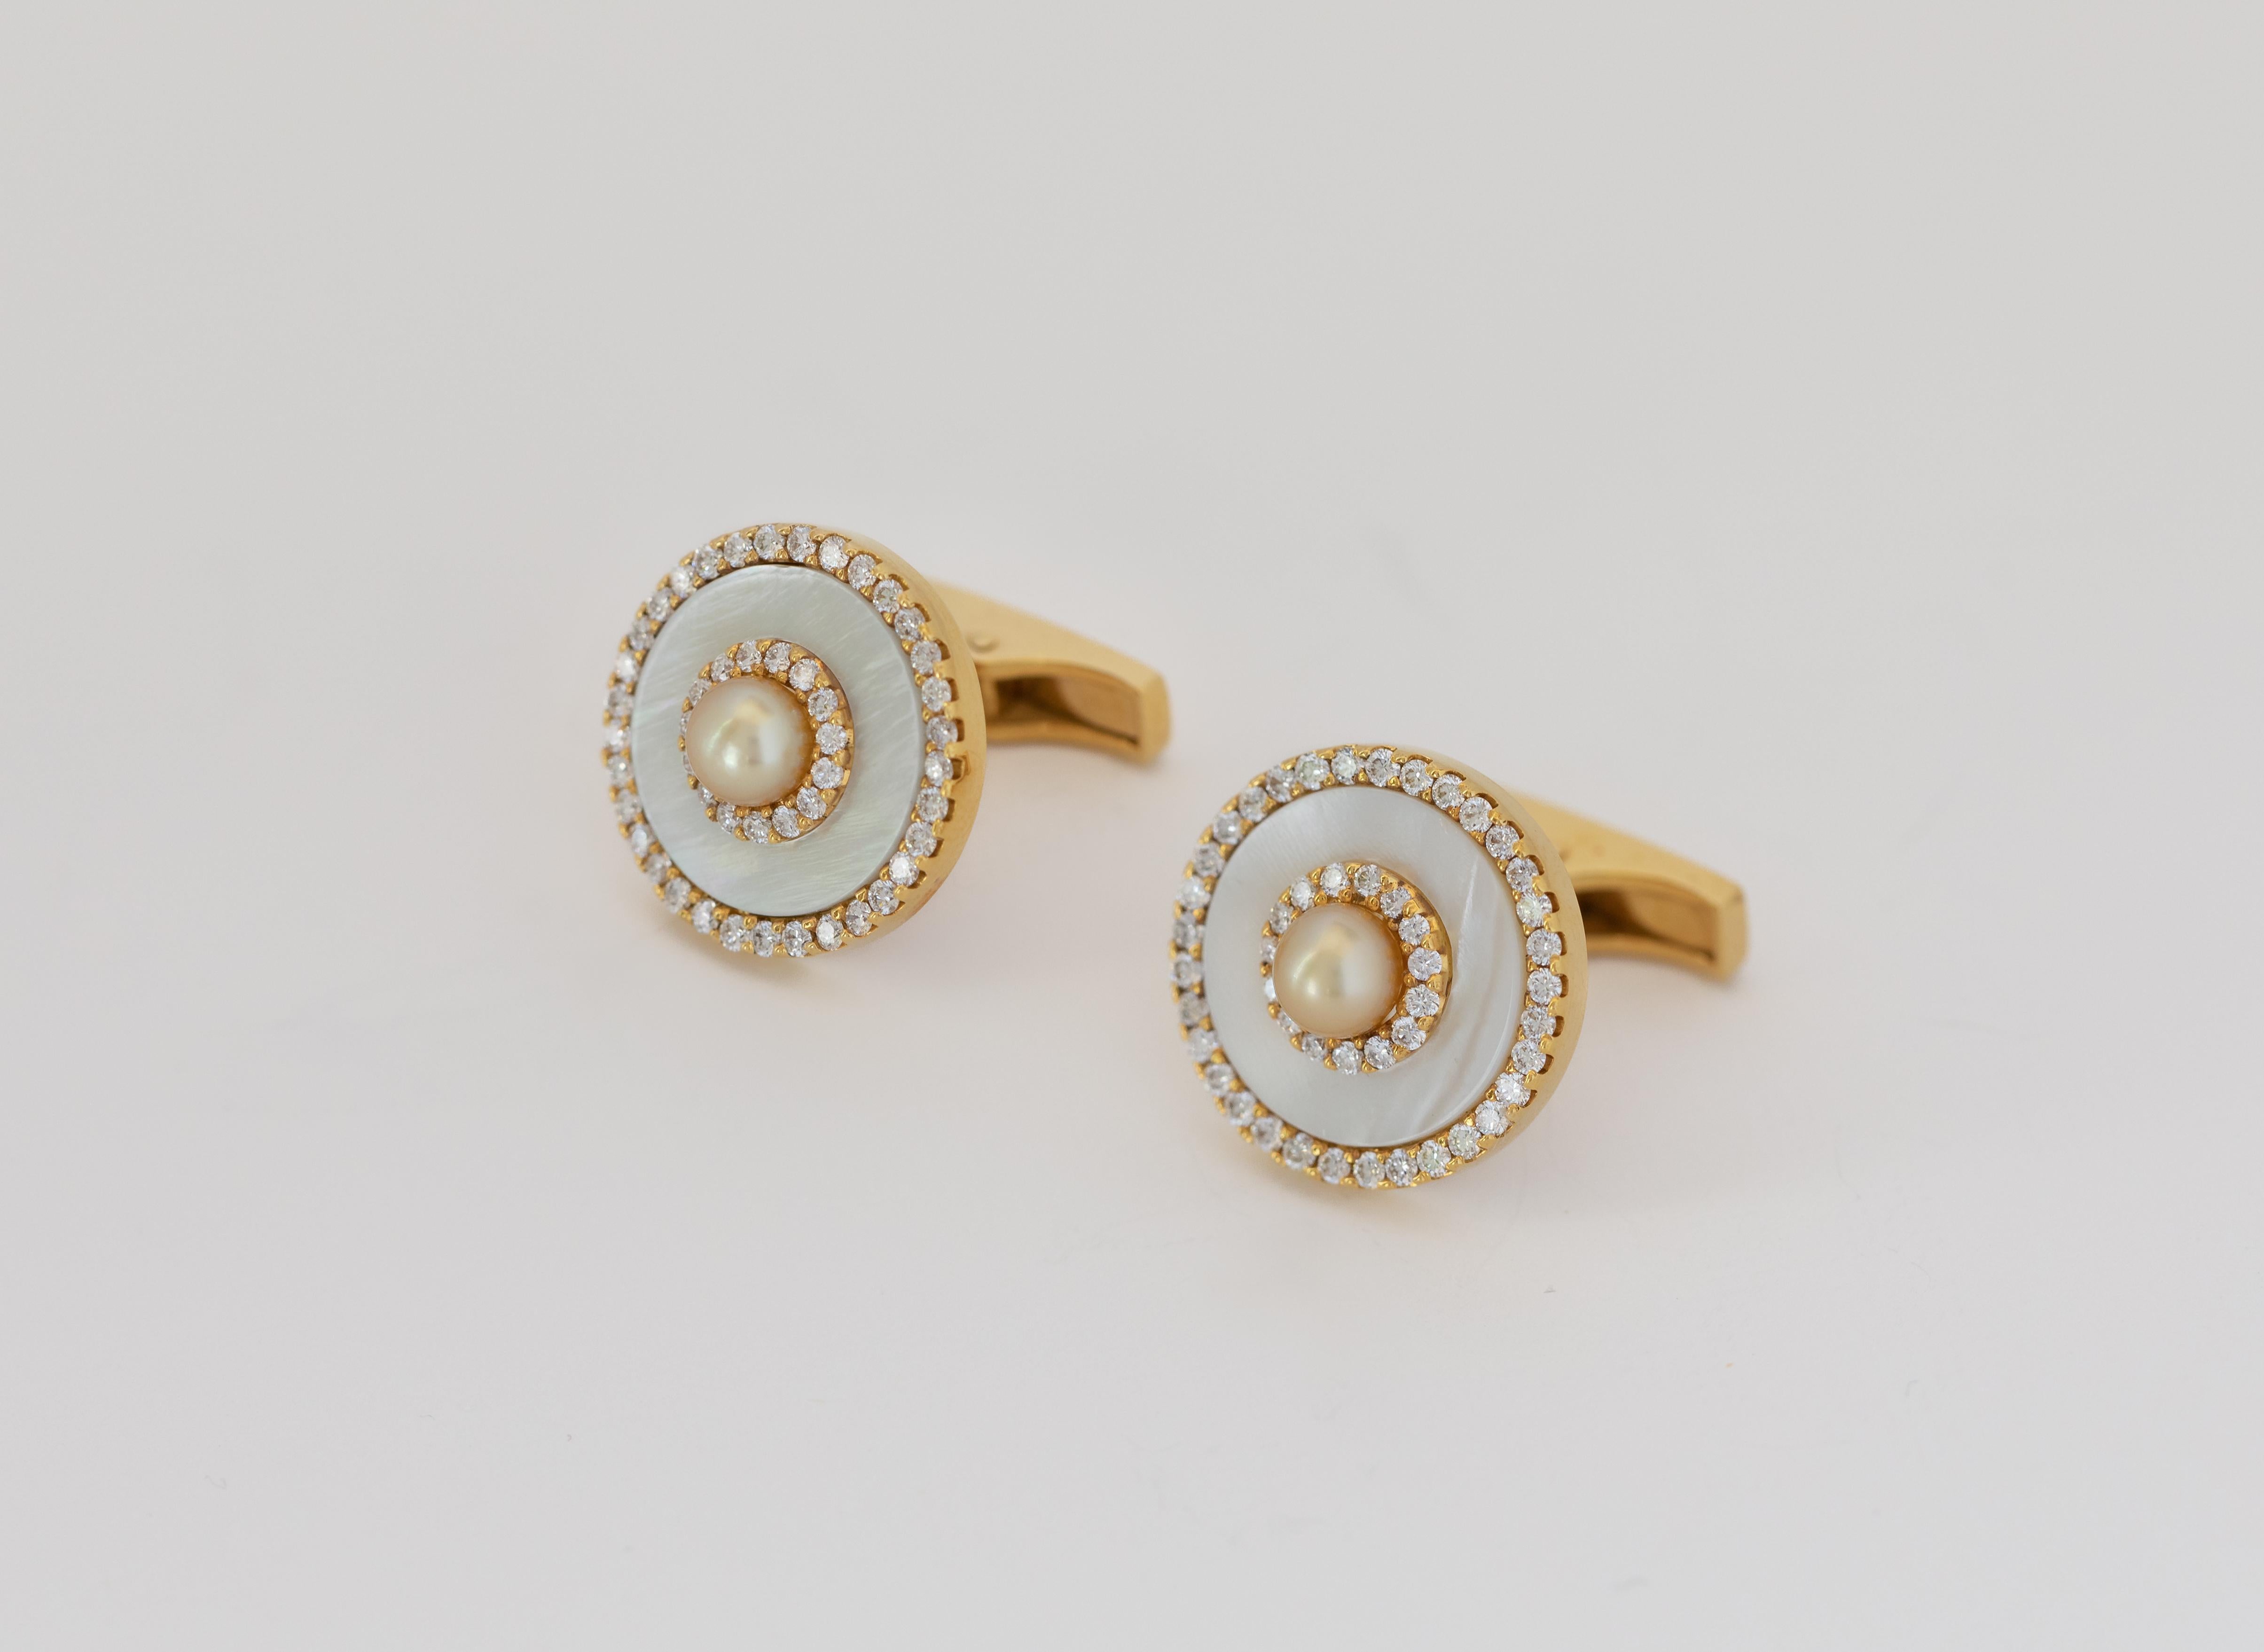 From the Mattar Jewelers cufflinks collection - diamonds and yellow gold encircle mother of pearl discs. Natural pearls are the centermost feature.

The cufflinks are designed and crafted in Bahrain.
The pearls are certified from the Gem and Pearl